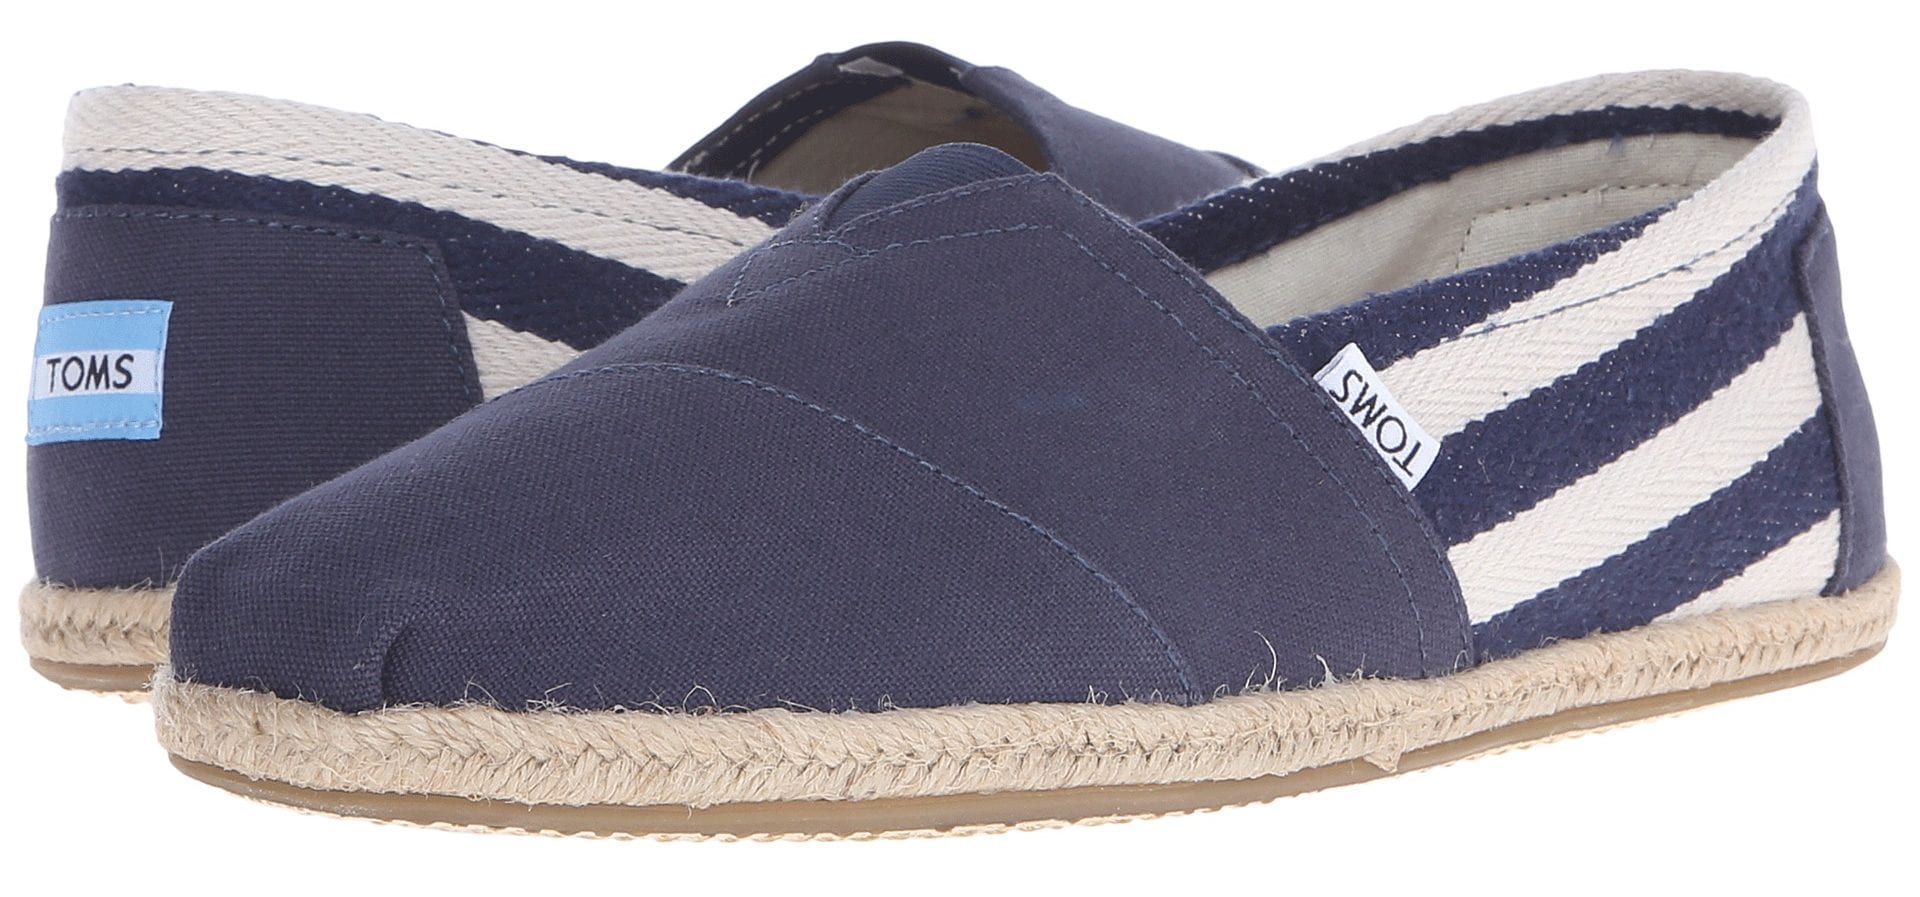 Mens Espadrilles 2022 – Soludos and Toms Slip-On Shoes